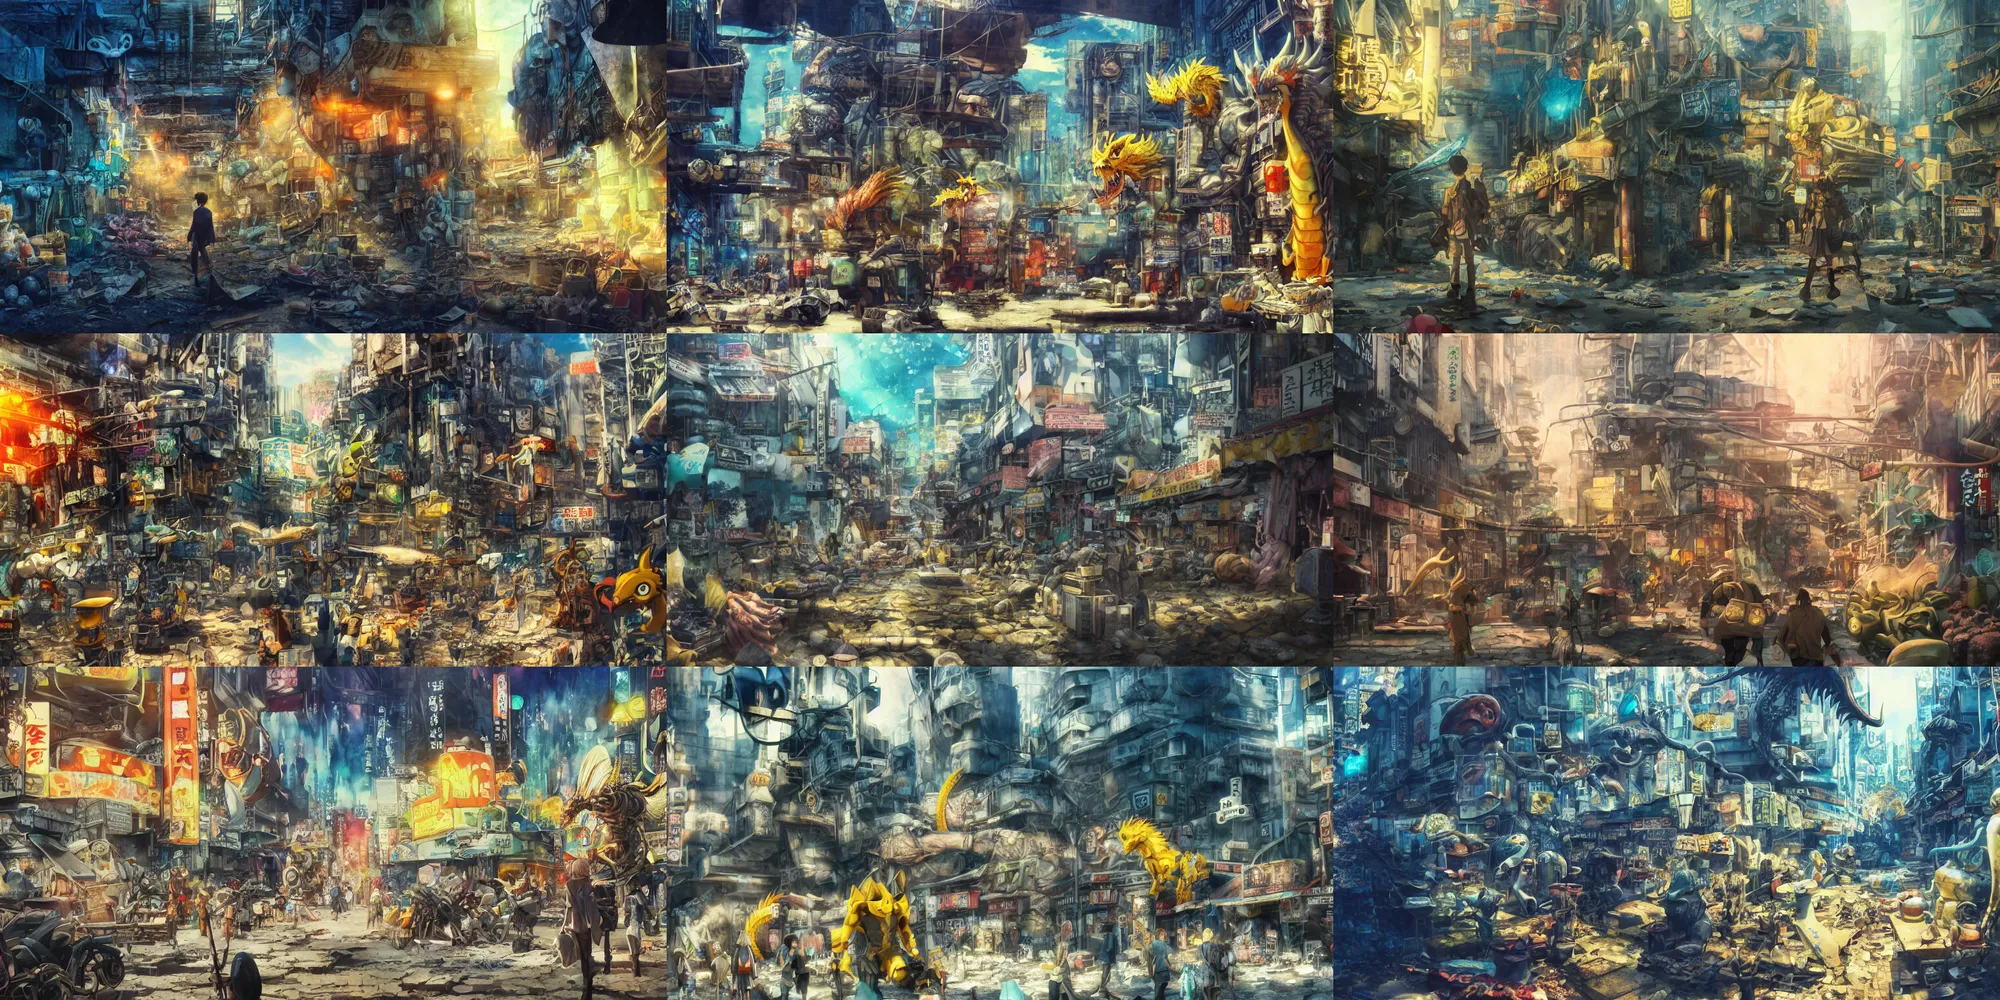 Prompt: incredible anime movie scene, watercolor, underwater market, coral, harsh bloom lighting, rim light, abandoned city, paper texture, movie scene, caustics shadows, deserted shinjuku junk town, old pawn shop, bright sun bleached ground, pipes, yellow dragon head festival, robot monster in background